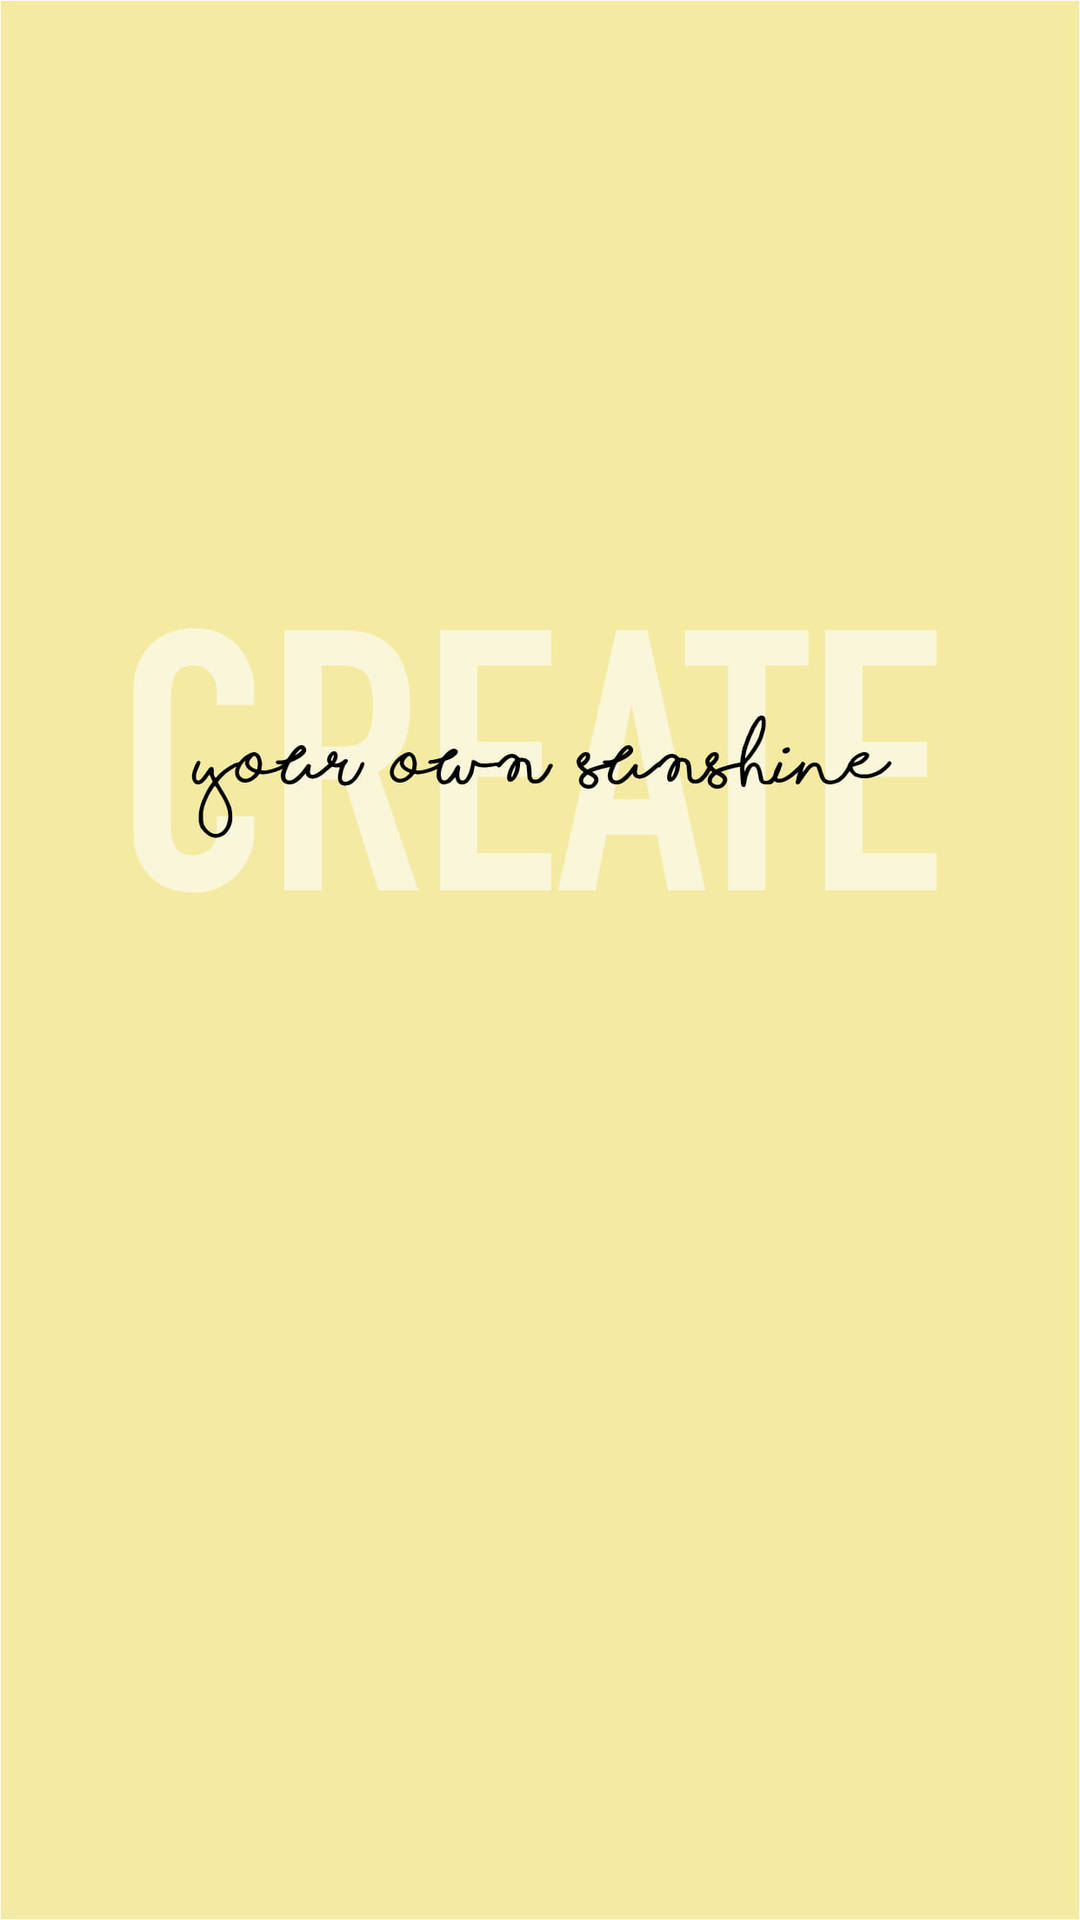 Pastel Yellow Aesthetic With Simple Text